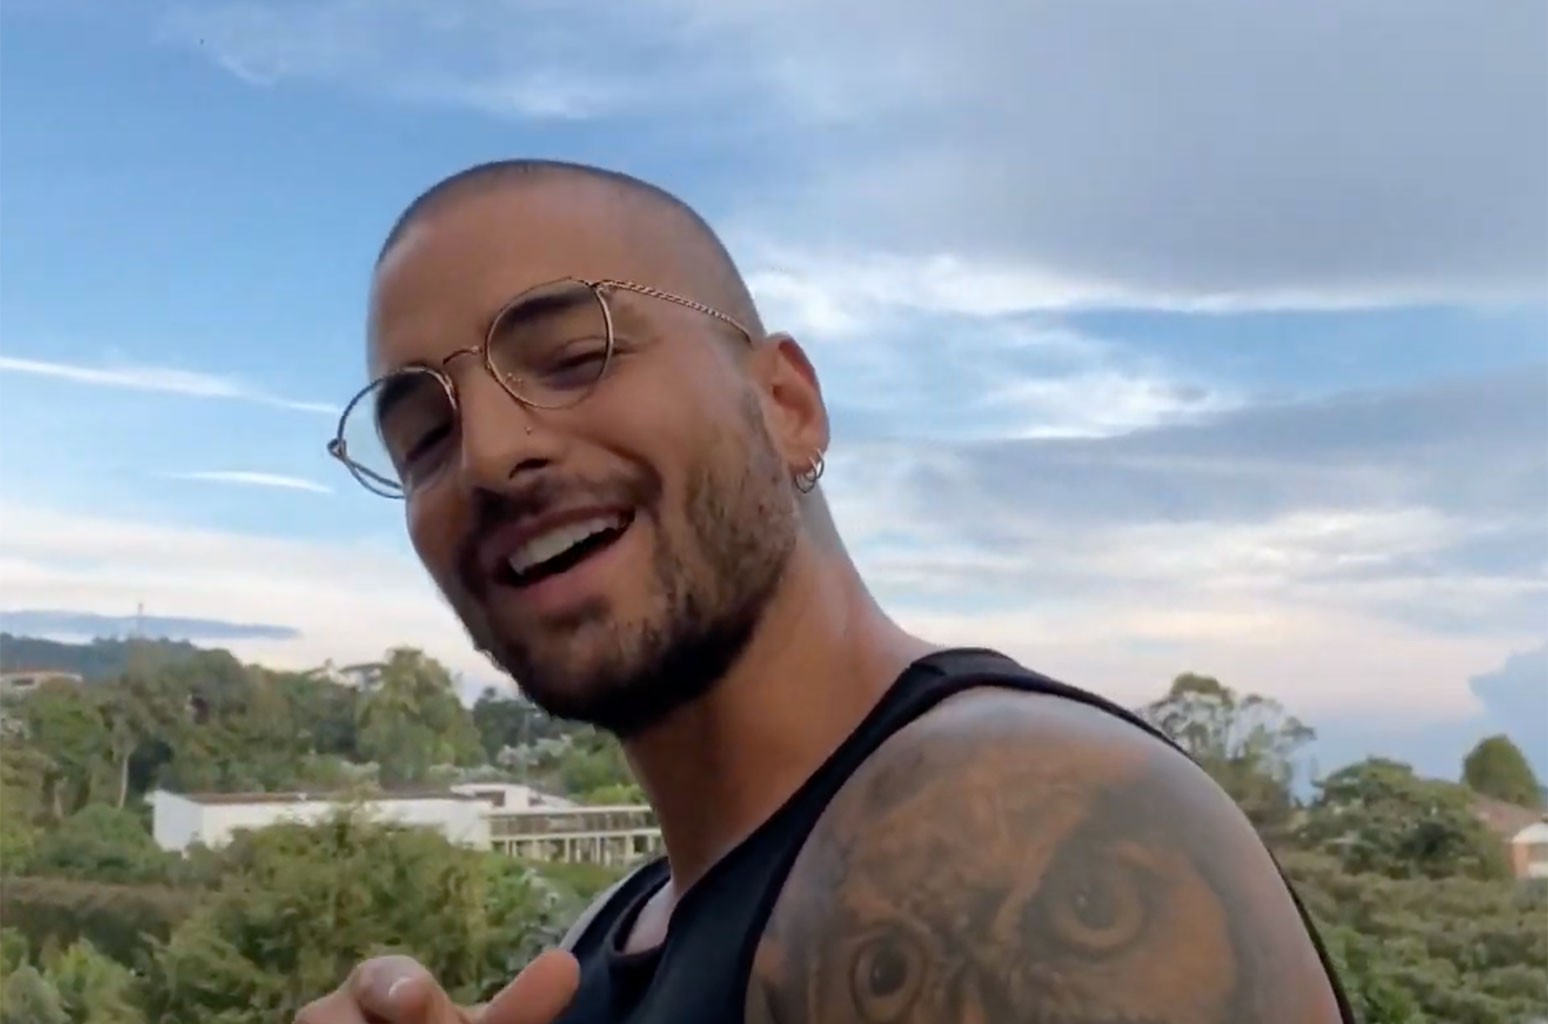 MALUMA PERFORMS MOVING RENDITION OF “CARNAVAL” ON “ONE WORLD: TOGETHER AT HOME” FROM HIS HOME IN MEDELLIN, COLOMBIA